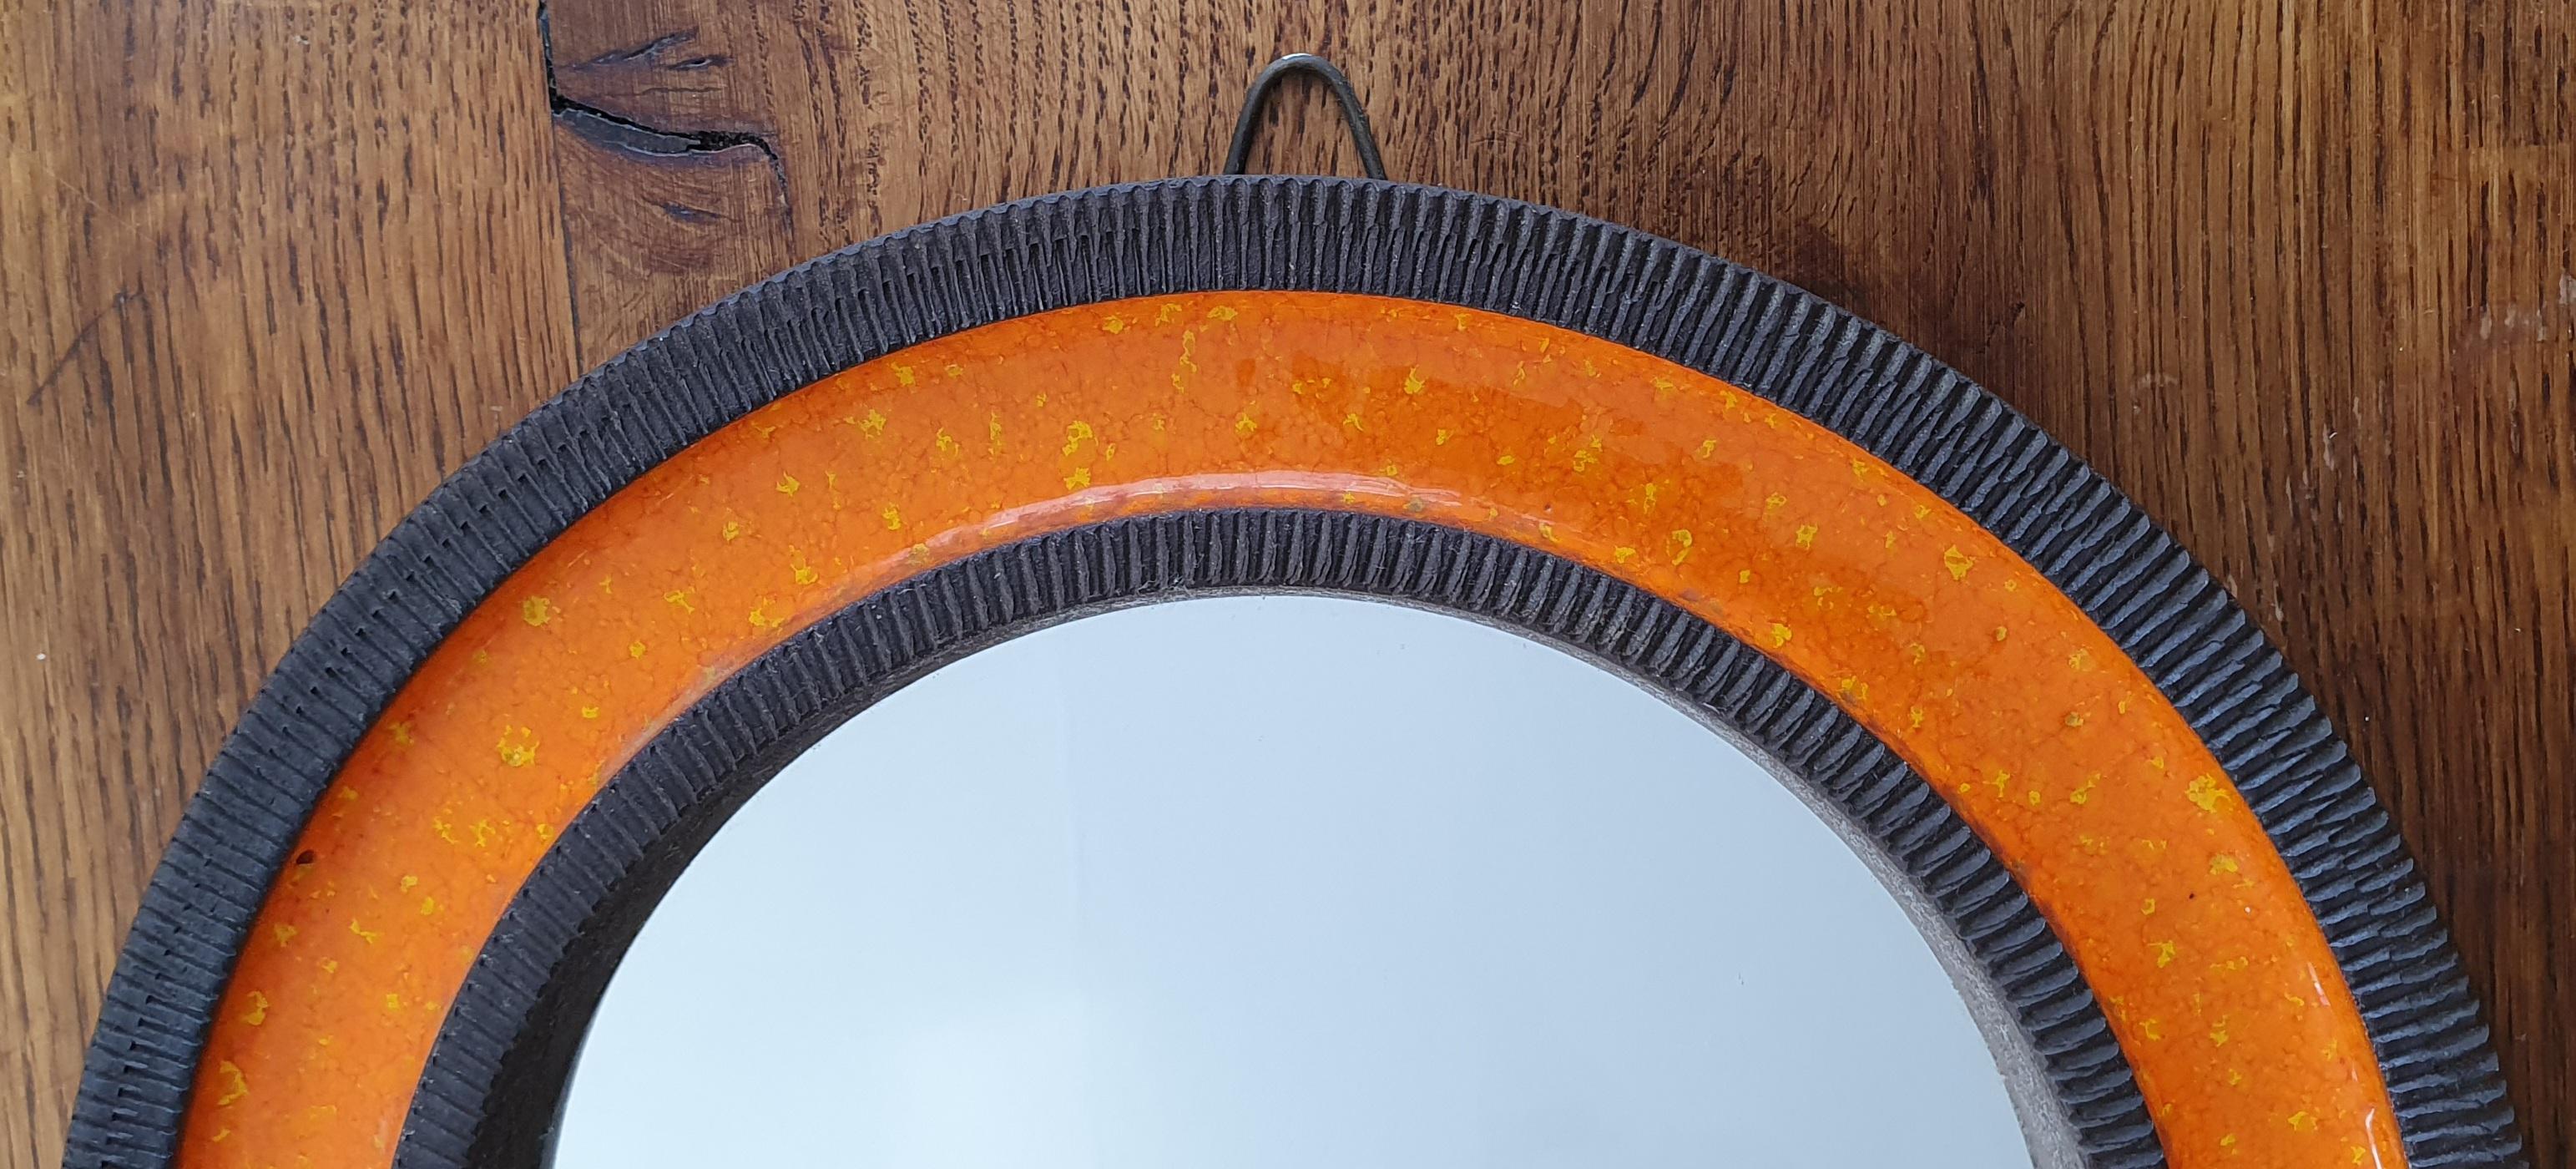 Orange midcentury round ceramic wall mirror designed by Erik Reiff for Danish Knabstrup. The mirror is made of glazed ceramic and has alternating rings with a ceramic ribbed edge and a smooth orange crystalline glaze on the inside. This color is